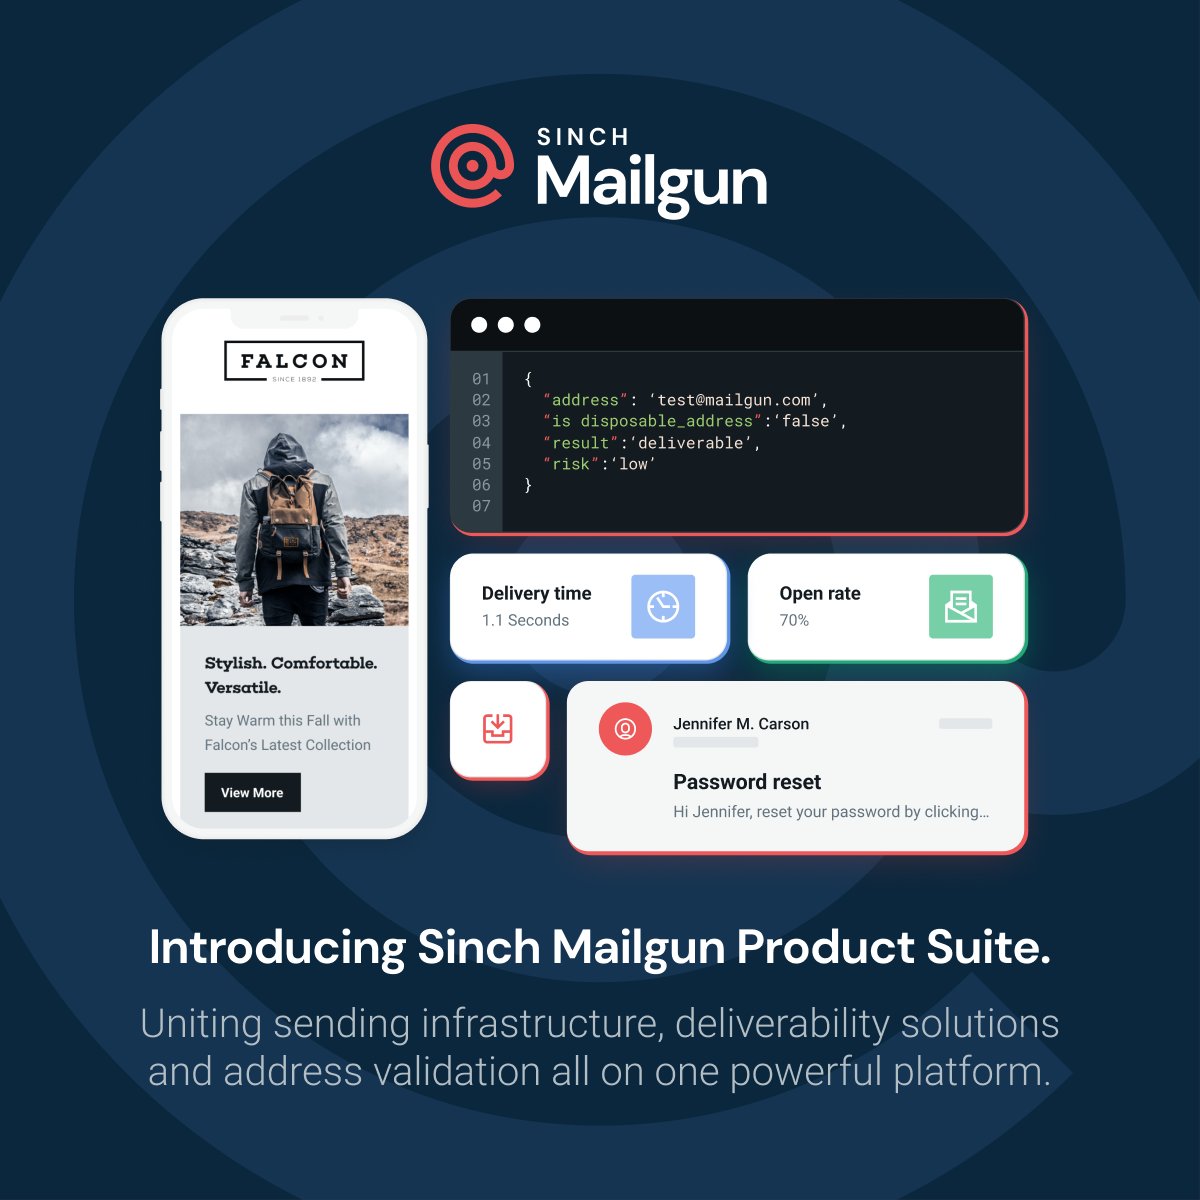 Same products, new names! We’re excited to announce the new Sinch Mailgun portfolio: Mailgun Send, Mailgun Optimize, and Mailgun Validate! 🎉 To learn more, check out our latest blog post here! 🔗➡️ mailgun.com/blog/company/m…